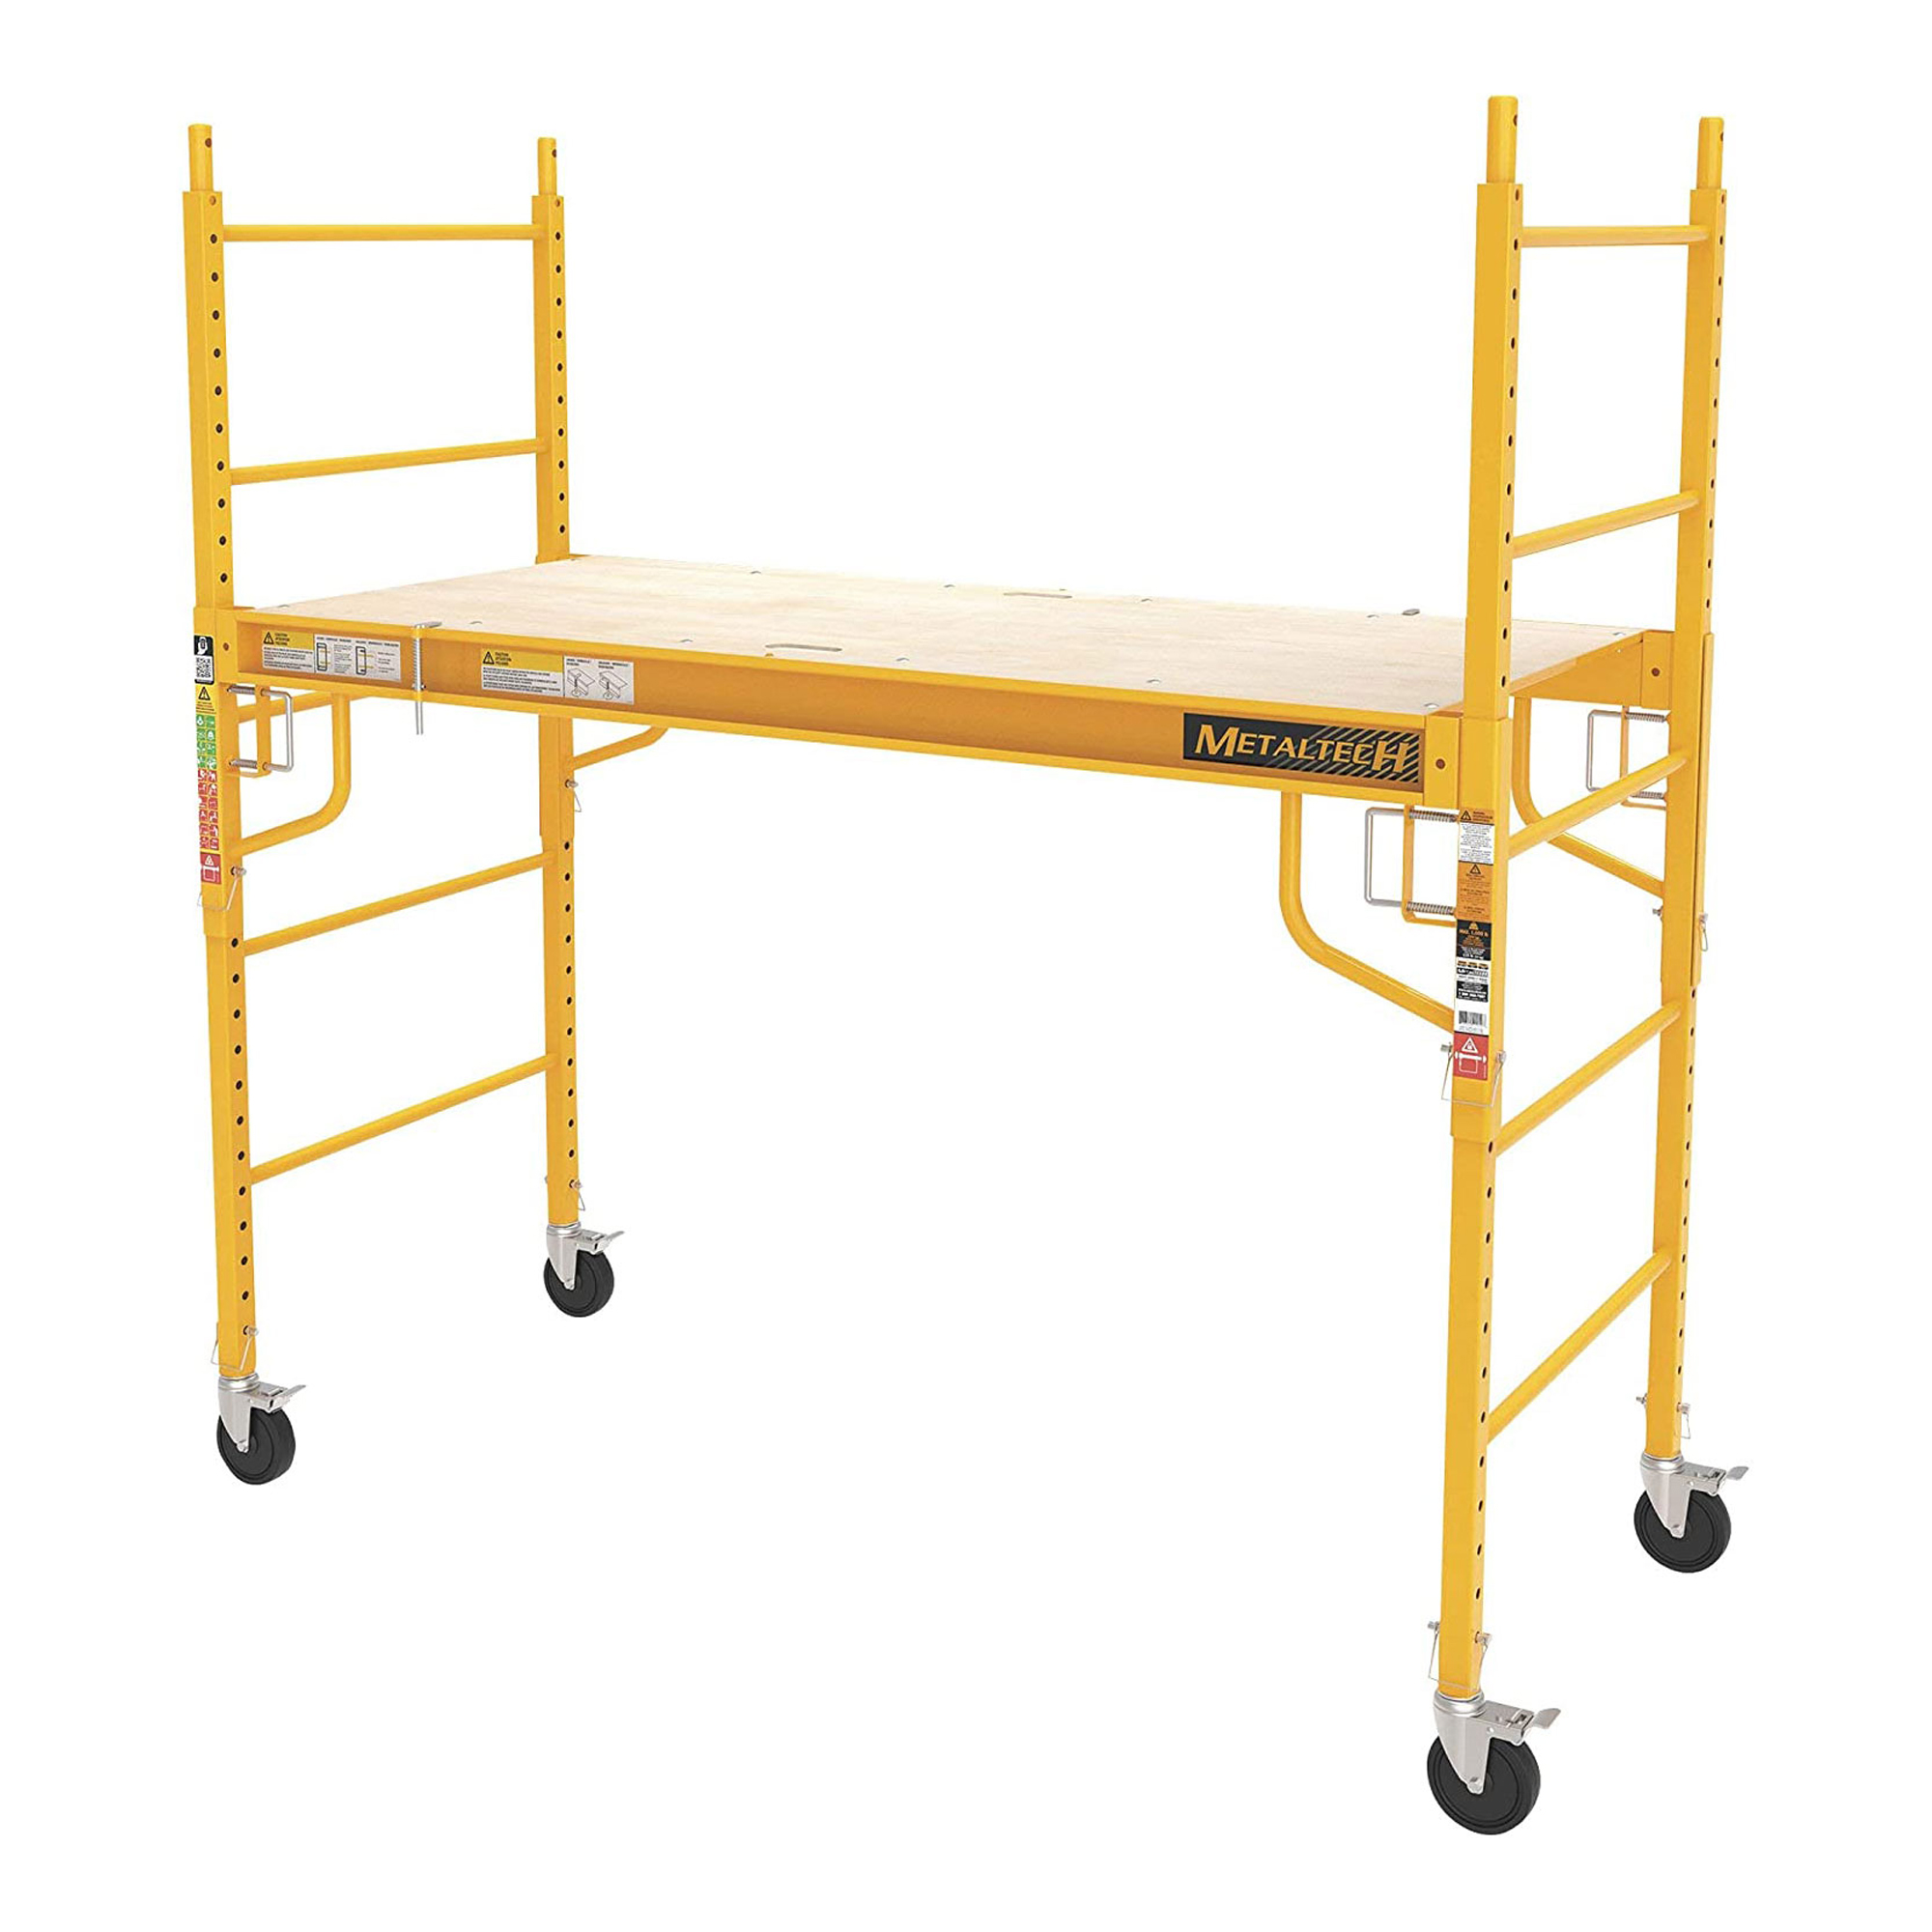 MetalTech 6 Foot Portable Jobsite Series Baker Scaffolding with Locking Wheels - image 1 of 7